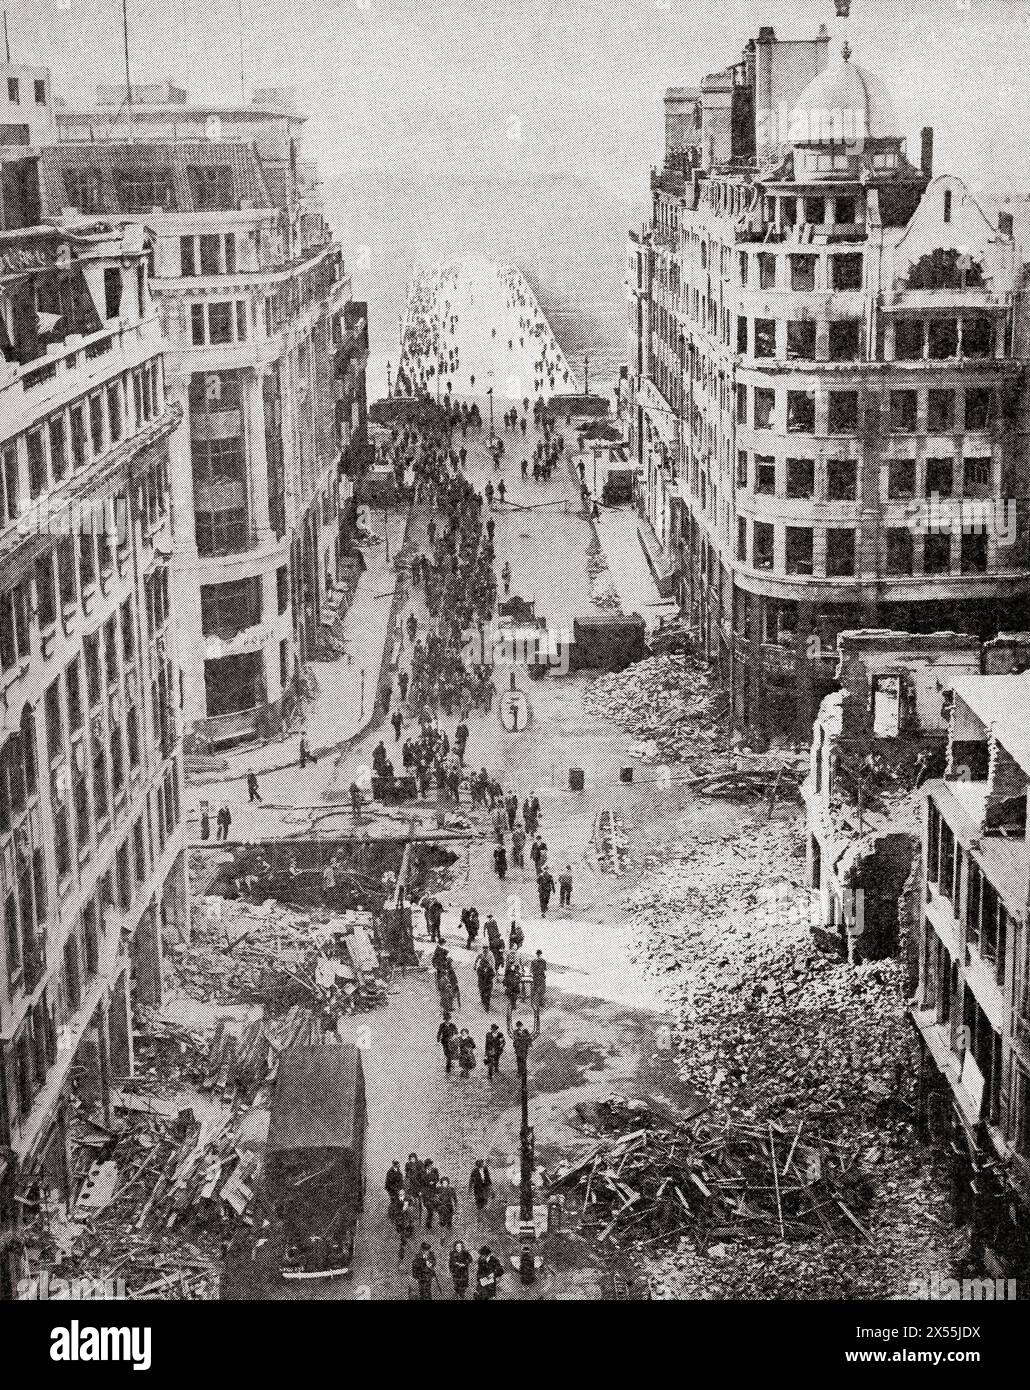 The approach to London Bridge after a German bombing attack, September 1940.  Civilians making their way to work amongst the rubble.  From The War in Pictures, Sixth Year. Stock Photo